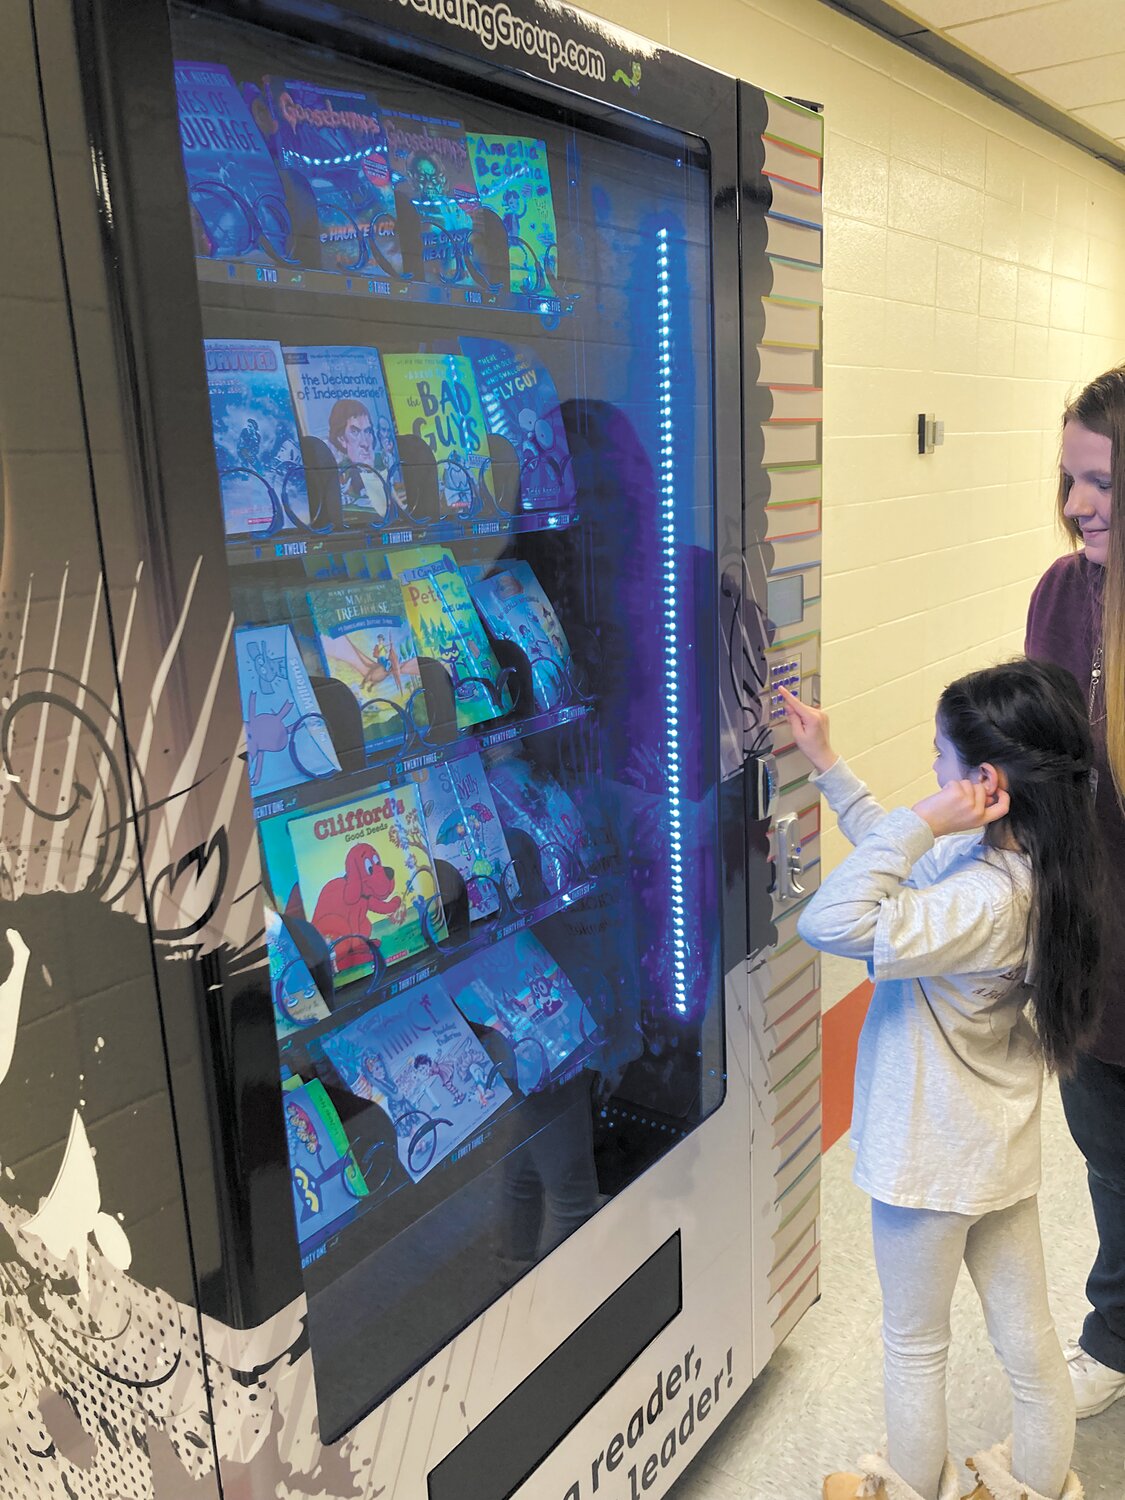 READING MACHINE: Following the assembly, Kidd gave Hoxsie’s book vending machine a visit. She ended up buying “Bluey: The Pool,” a book based off of popular children’s TV show Bluey.